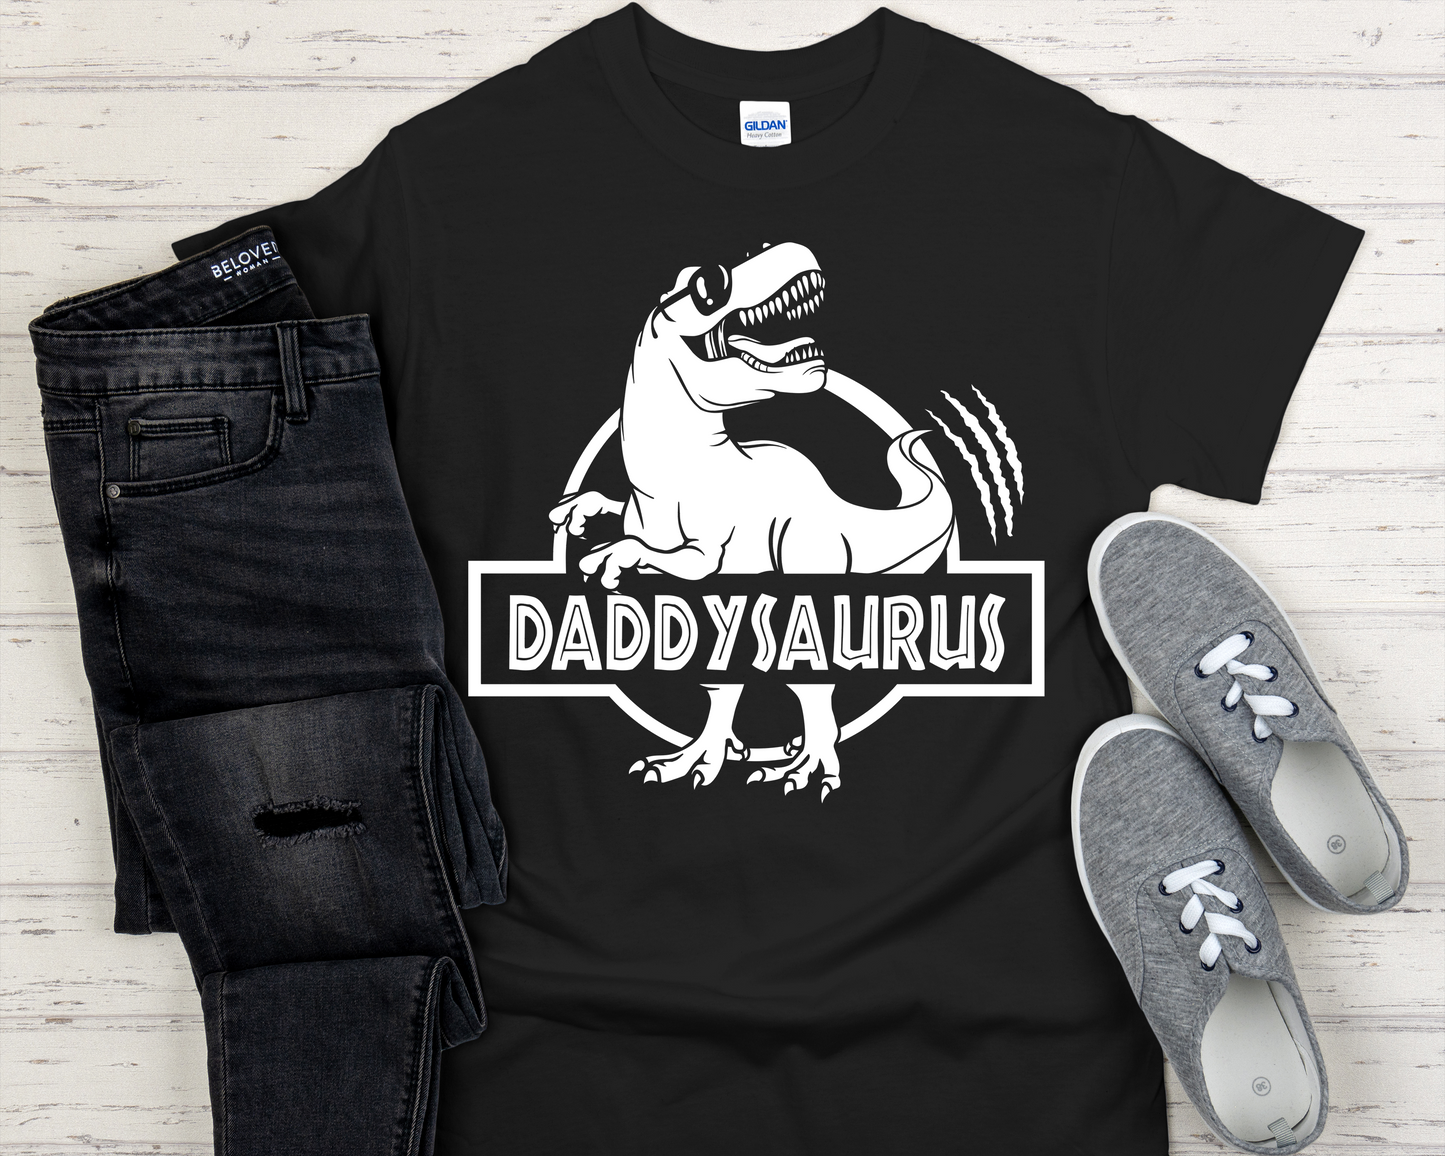 Dinosaurs Custom T-shirts, Custom Made, Dinosaurs, for Birthday or to wear as a family